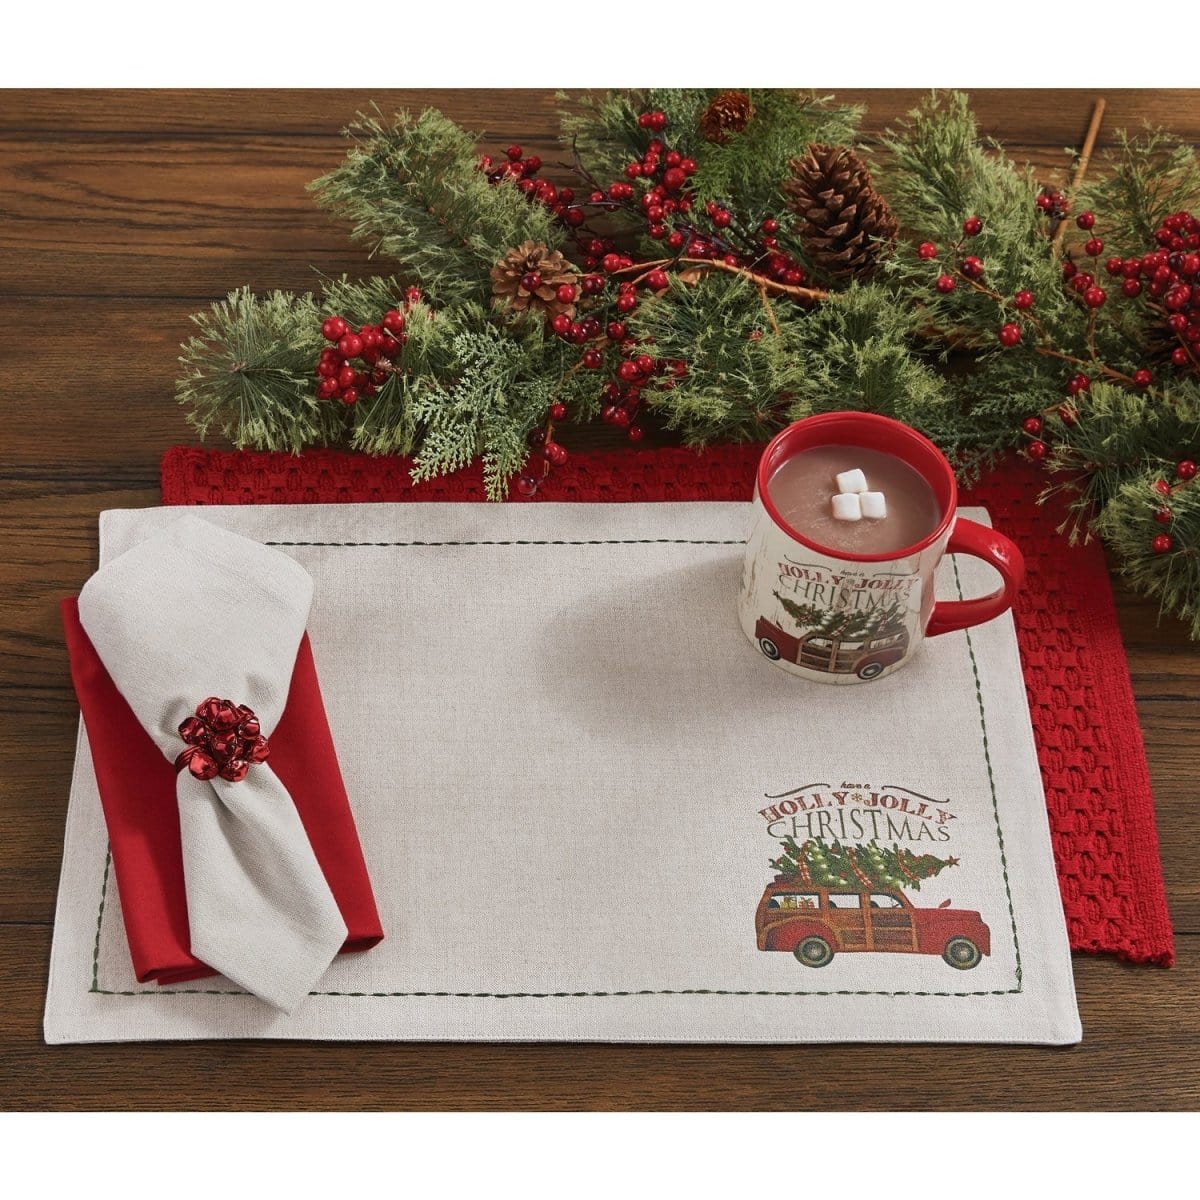 Over the River Printed woody Placemat-Park Designs-The Village Merchant